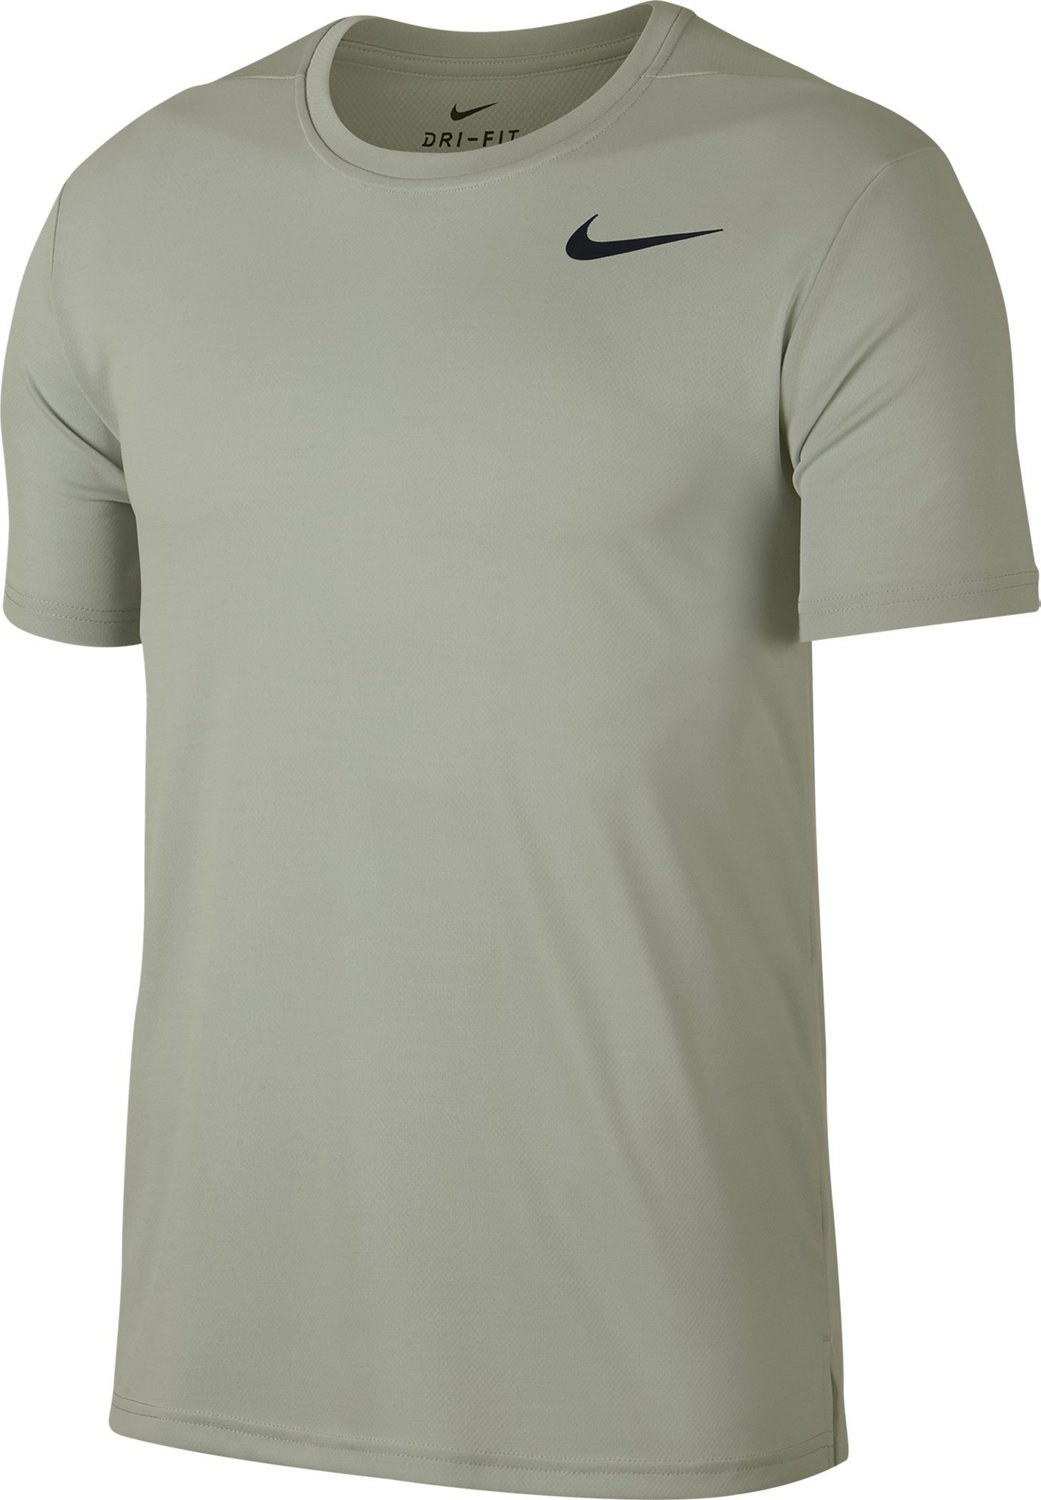 Search Results - Green Nike T-shirt | Academy